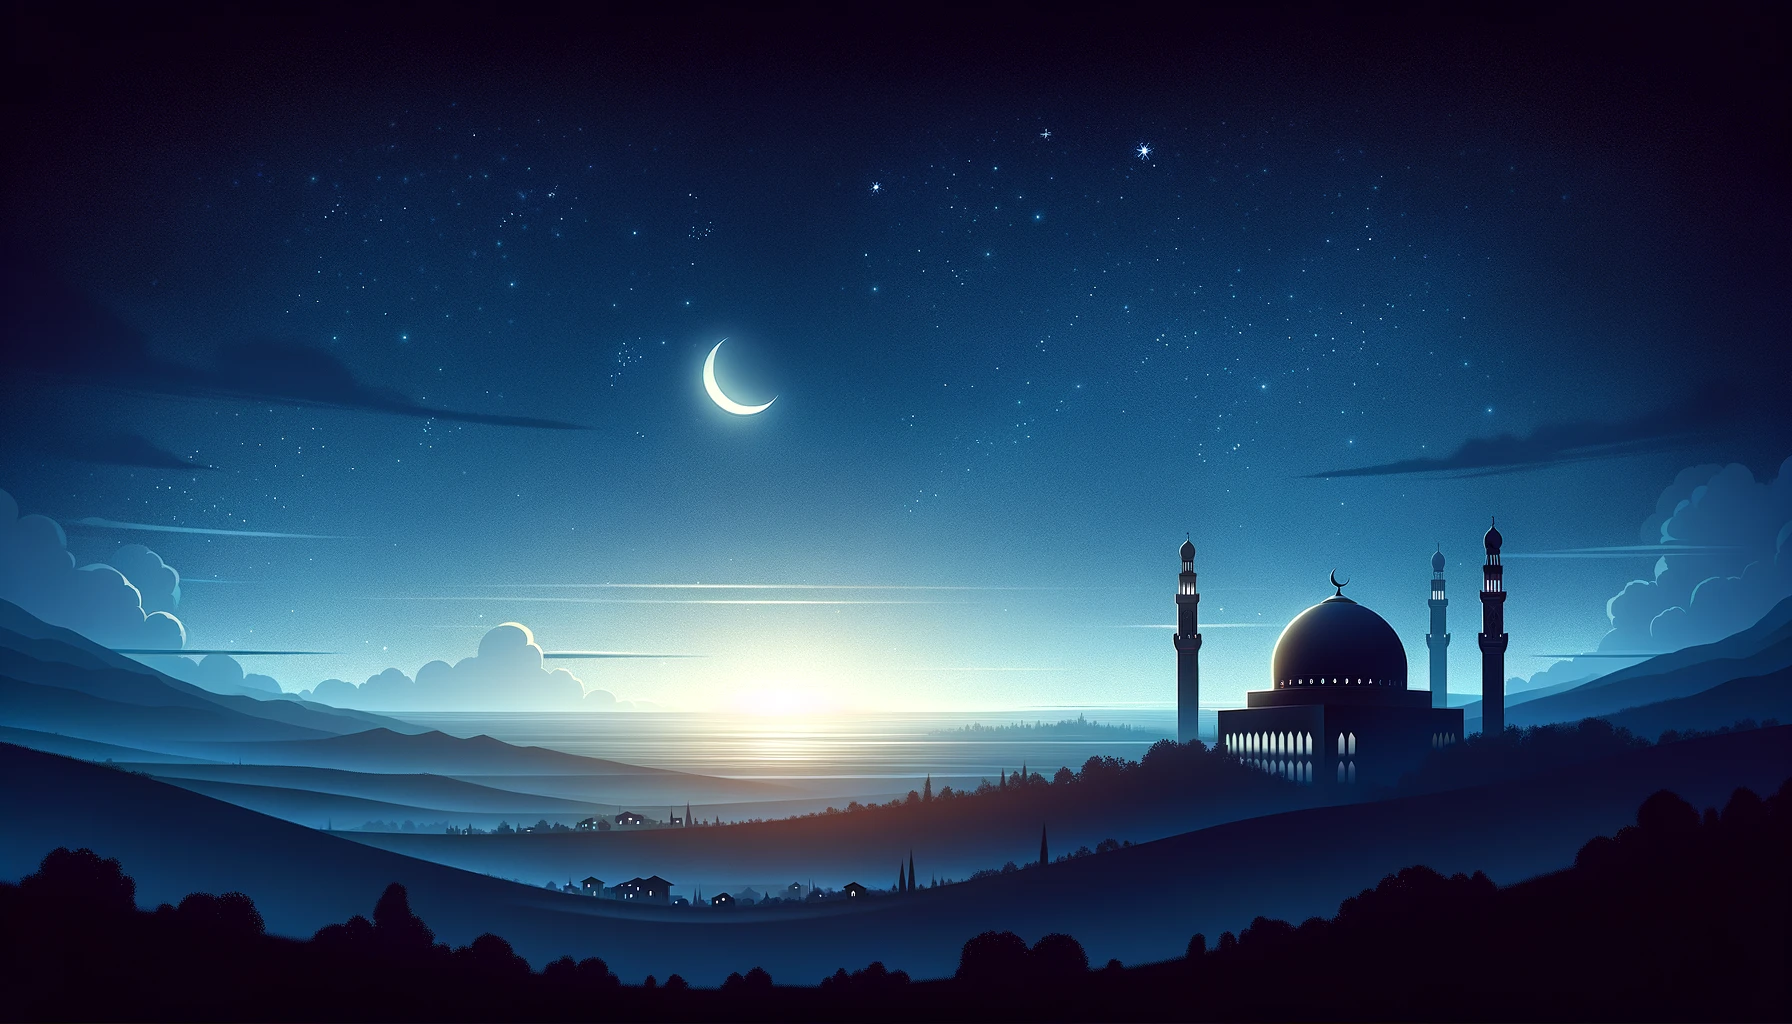 A serene desert oasis scene at twilight to symbolize the time for the Islamic prayer of Isha. The setting includes a tranquil oasis with palm trees and a small reflecting pool under the early night sky, transitioning from orange to deep twilight blues. A simple yet elegant mosque constructed from earthy materials is seen in the background, with its minaret gently illuminated by the last rays of the sunset. Stars just beginning to twinkle in the sky, emphasizing the peaceful end of the day in a natural setting.